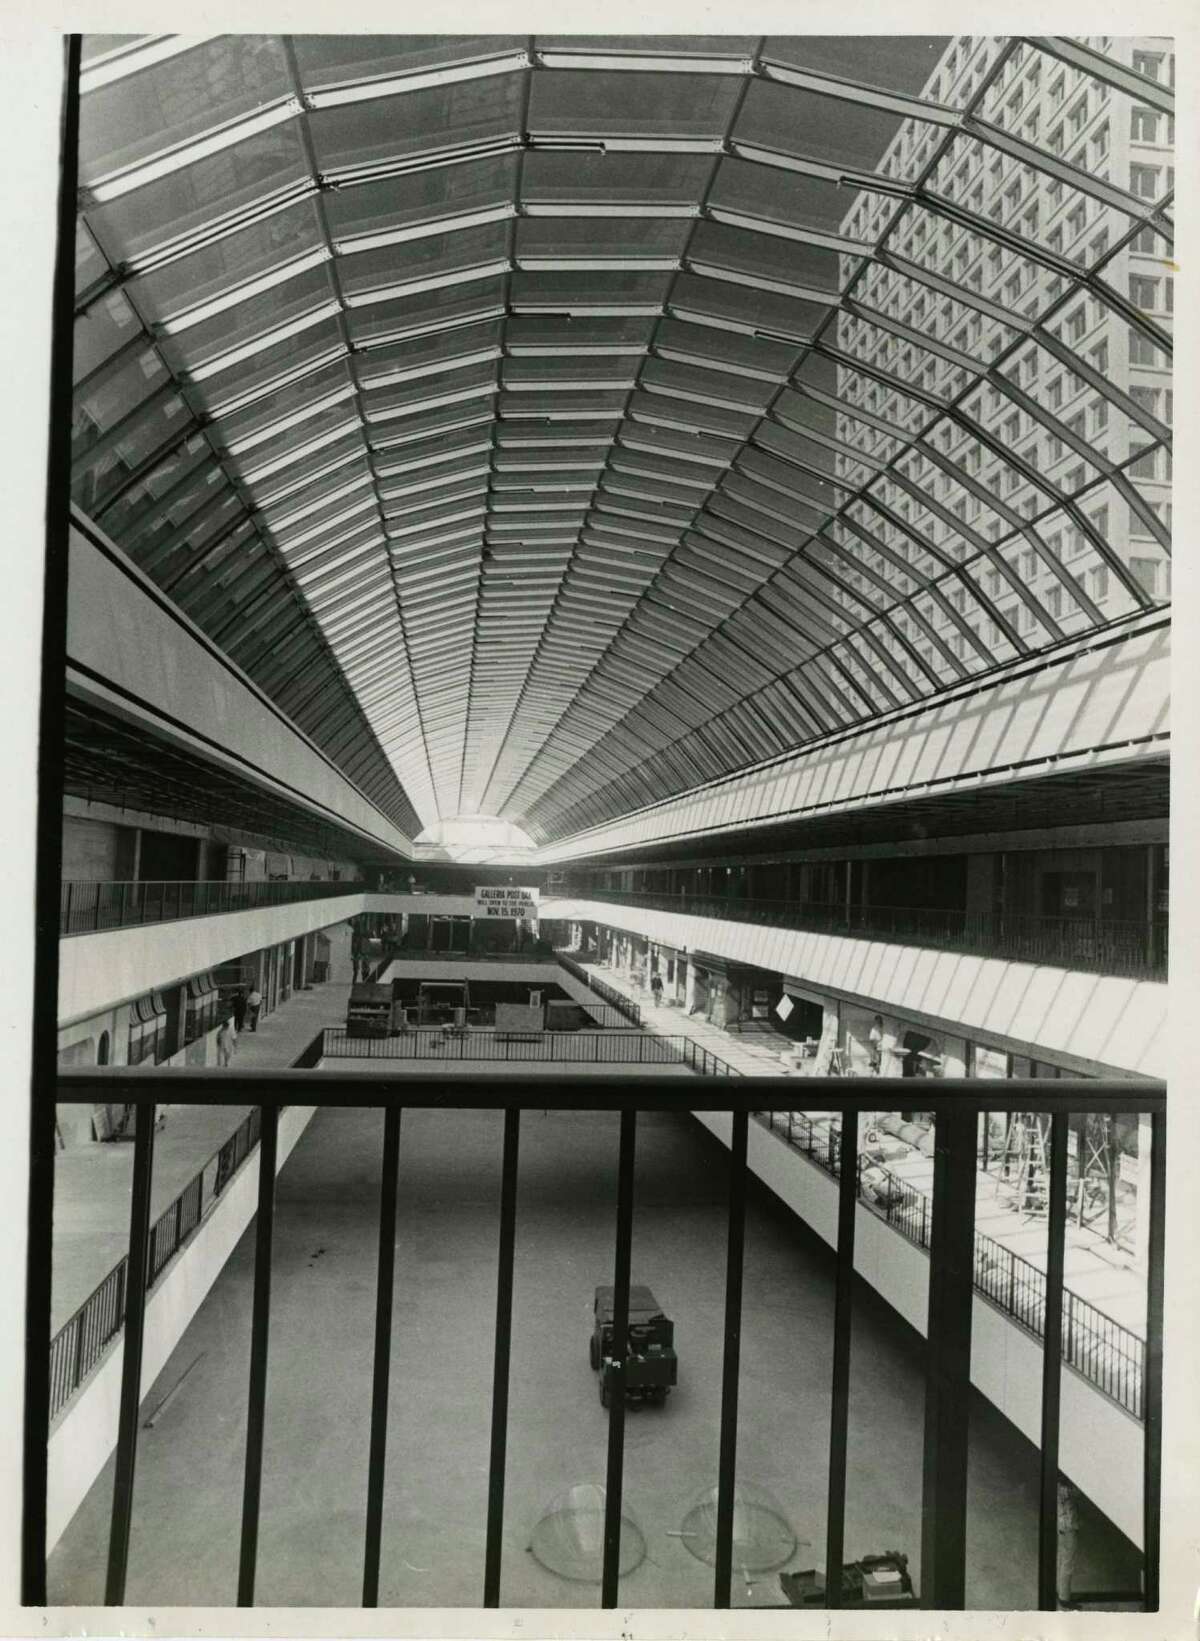 The Galleria as it appeared a couple of weeks before it opened Nov. 15, 1970, bringing three levels of shops, galleries and restaurants to Houston.